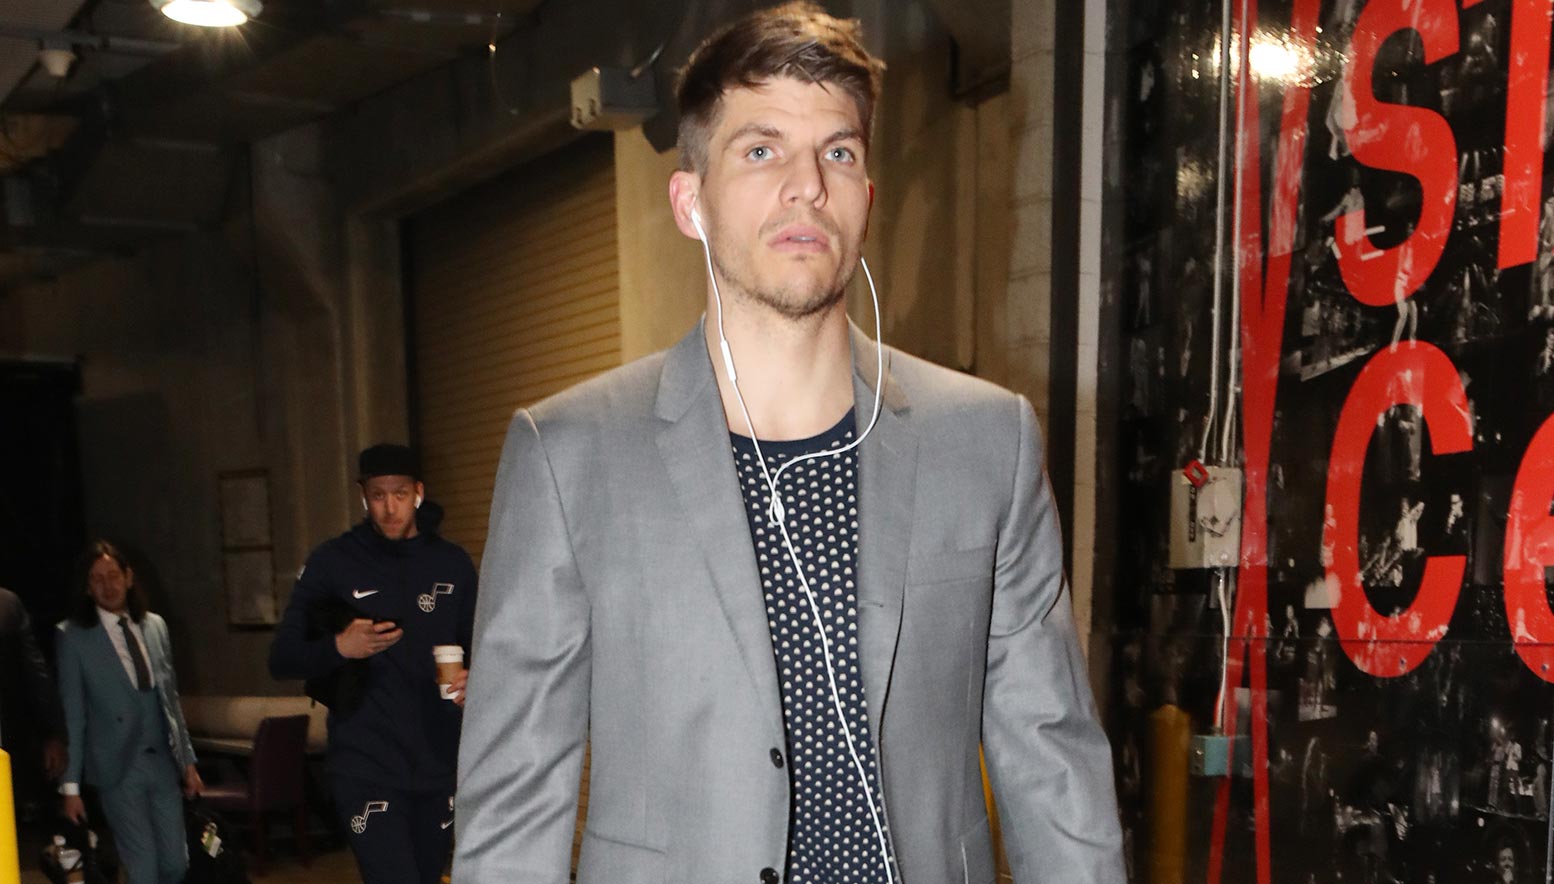 Kyle Korver #26 of the Utah Jazz arrives to the arena prior to the game against the Los Angeles Lakers